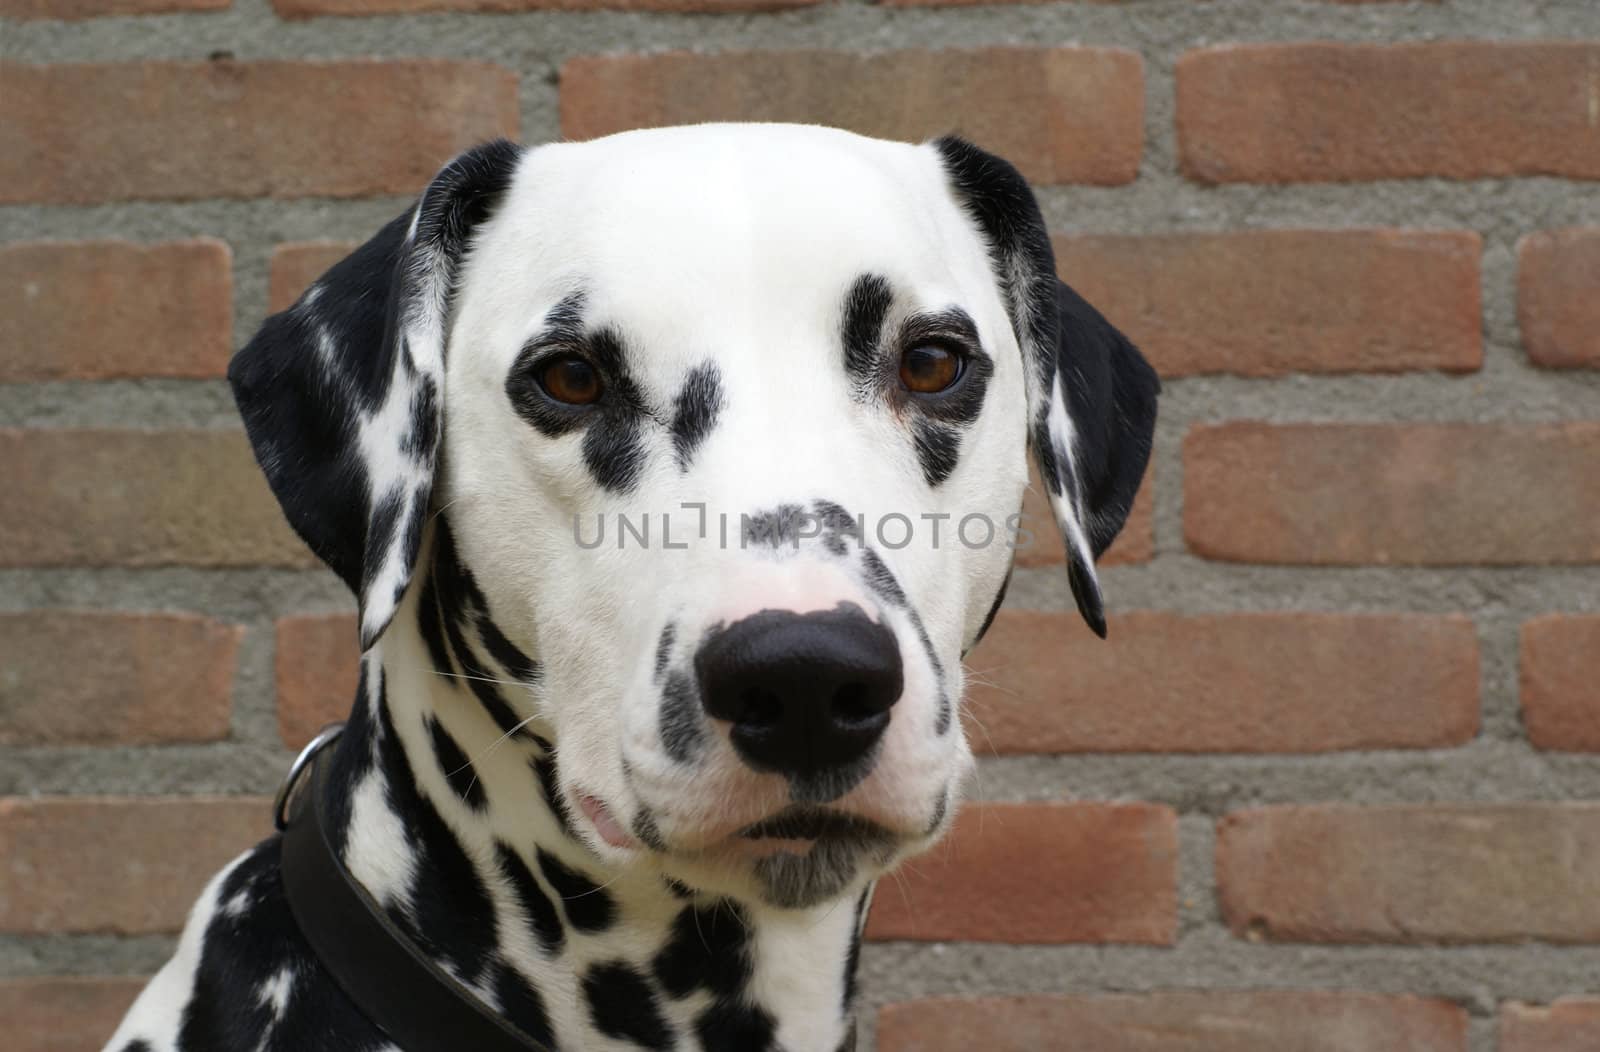 Dalmatian portrait in front of a brick wall.